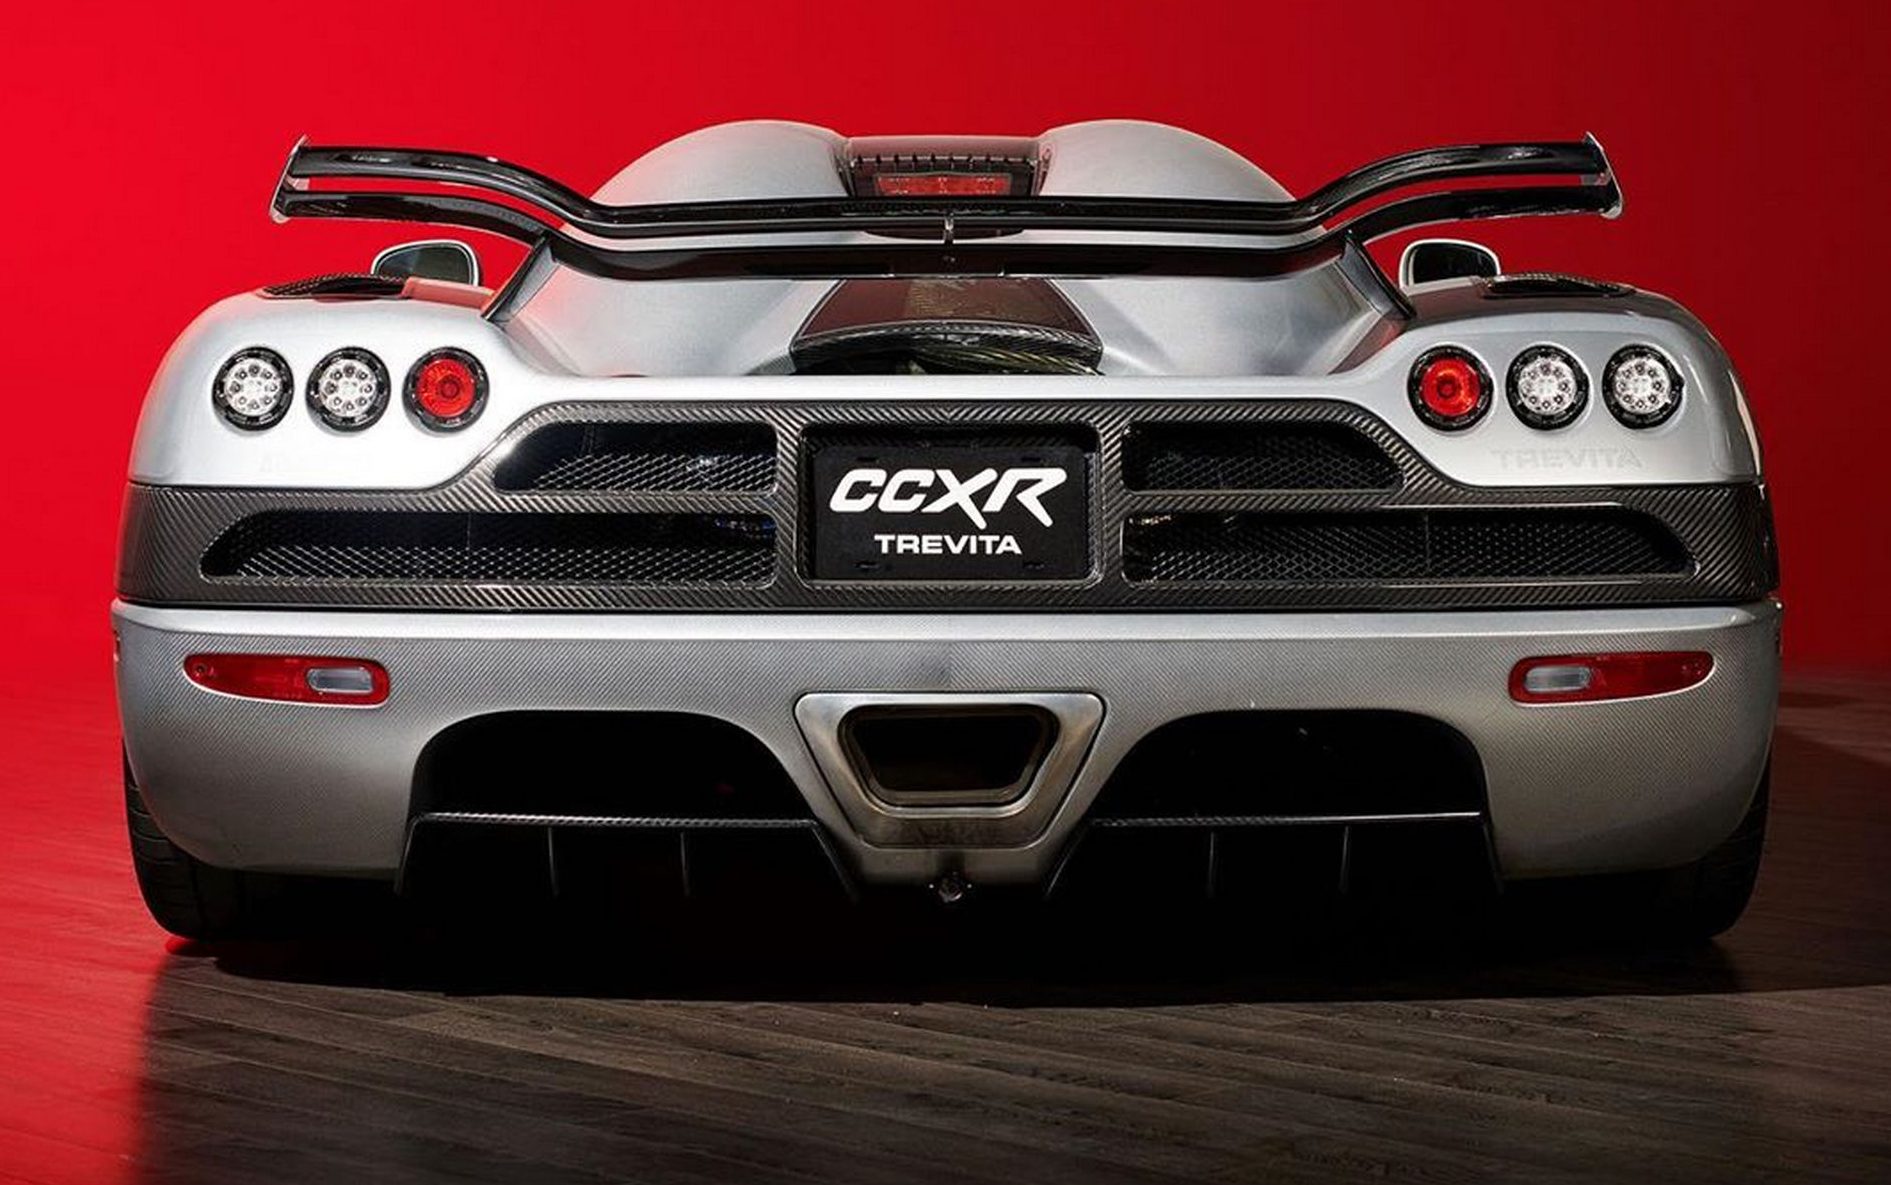 You Can Lease A Koenigsegg CCXR Trevita For $24,000 Per Month For 5 Years  (After A $650,000 Down Payment) | Carscoops